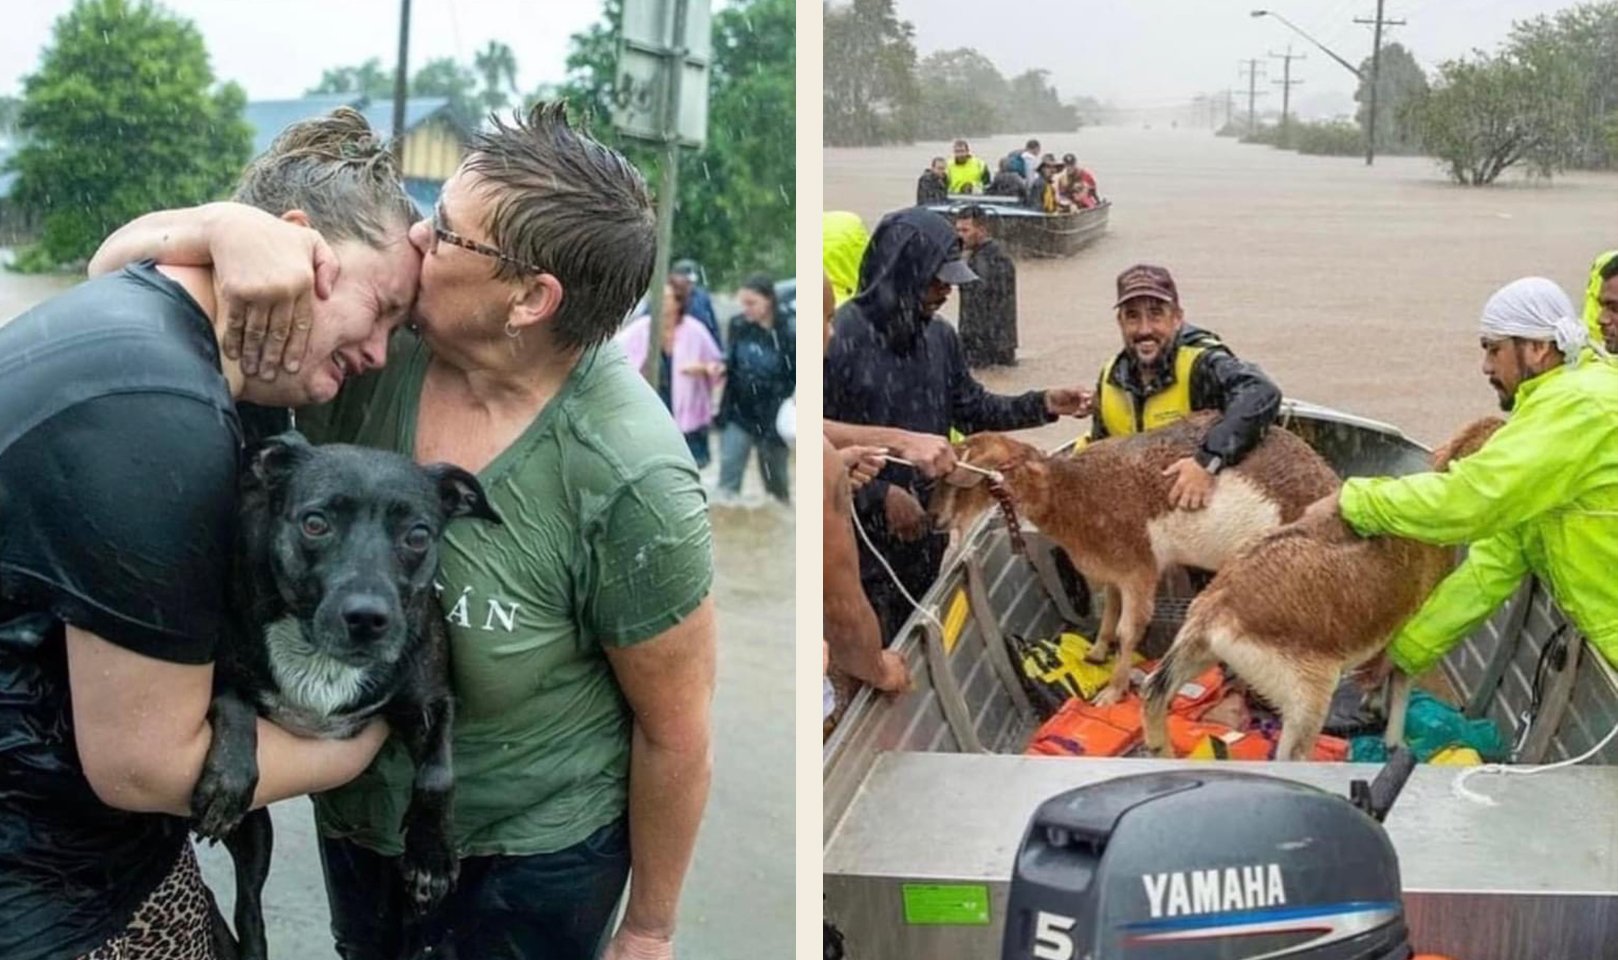 2 images of the floods in the Northern Rivers. The Image on the lefts shows 2 women hugging, one of them crying, holding a dog. The image on the right shows men in a boat with goats that they have rescued.